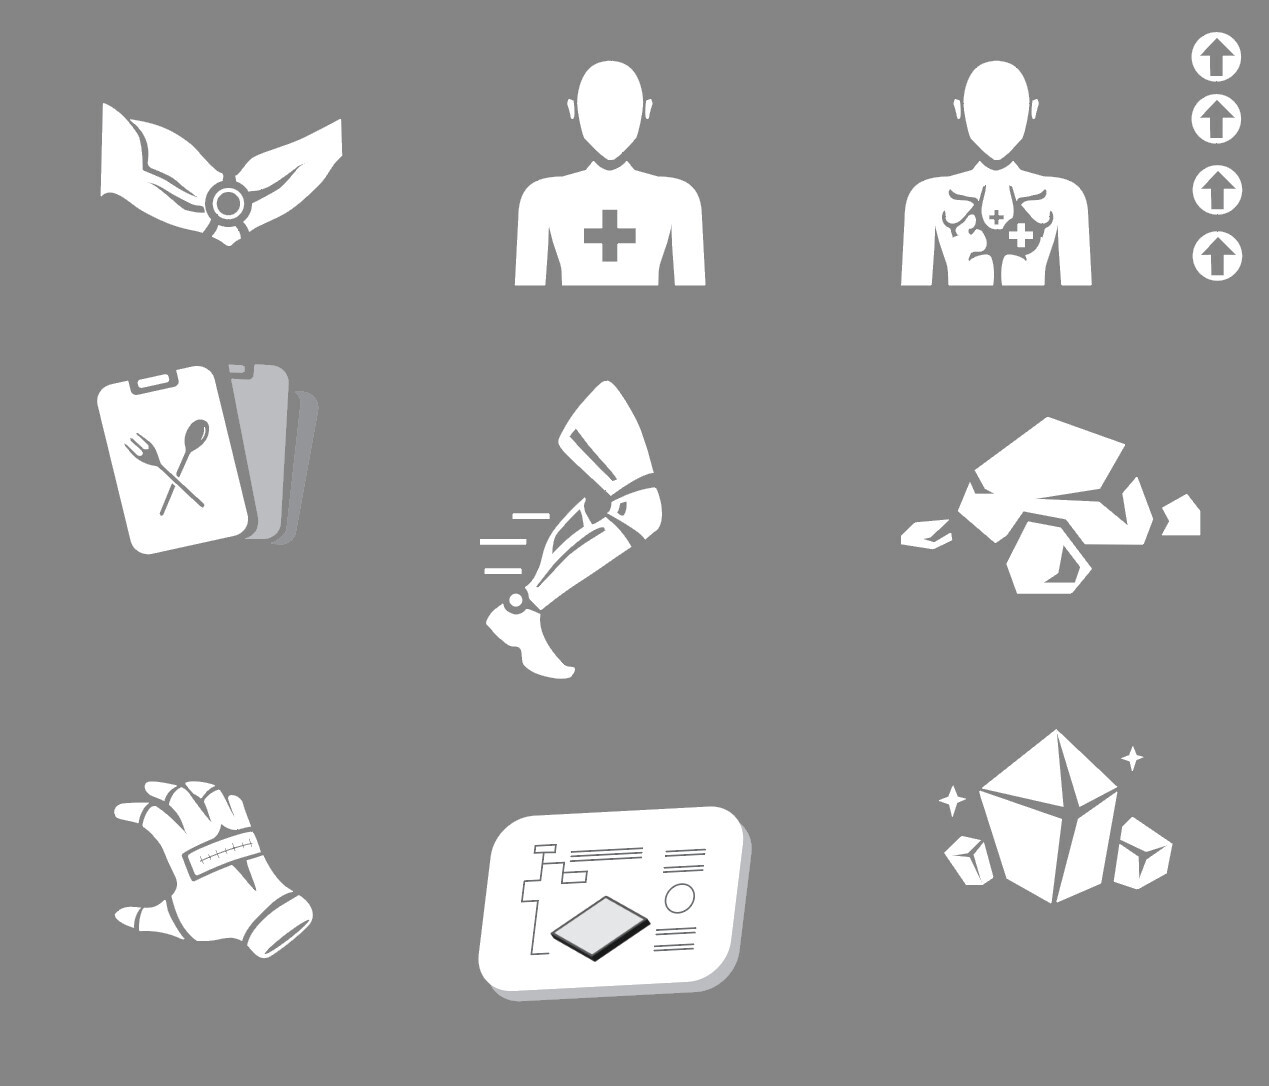 Icons for the stats and proficiencies upgrades, like improved Health Regen, movement speed, mining, cooking, etc